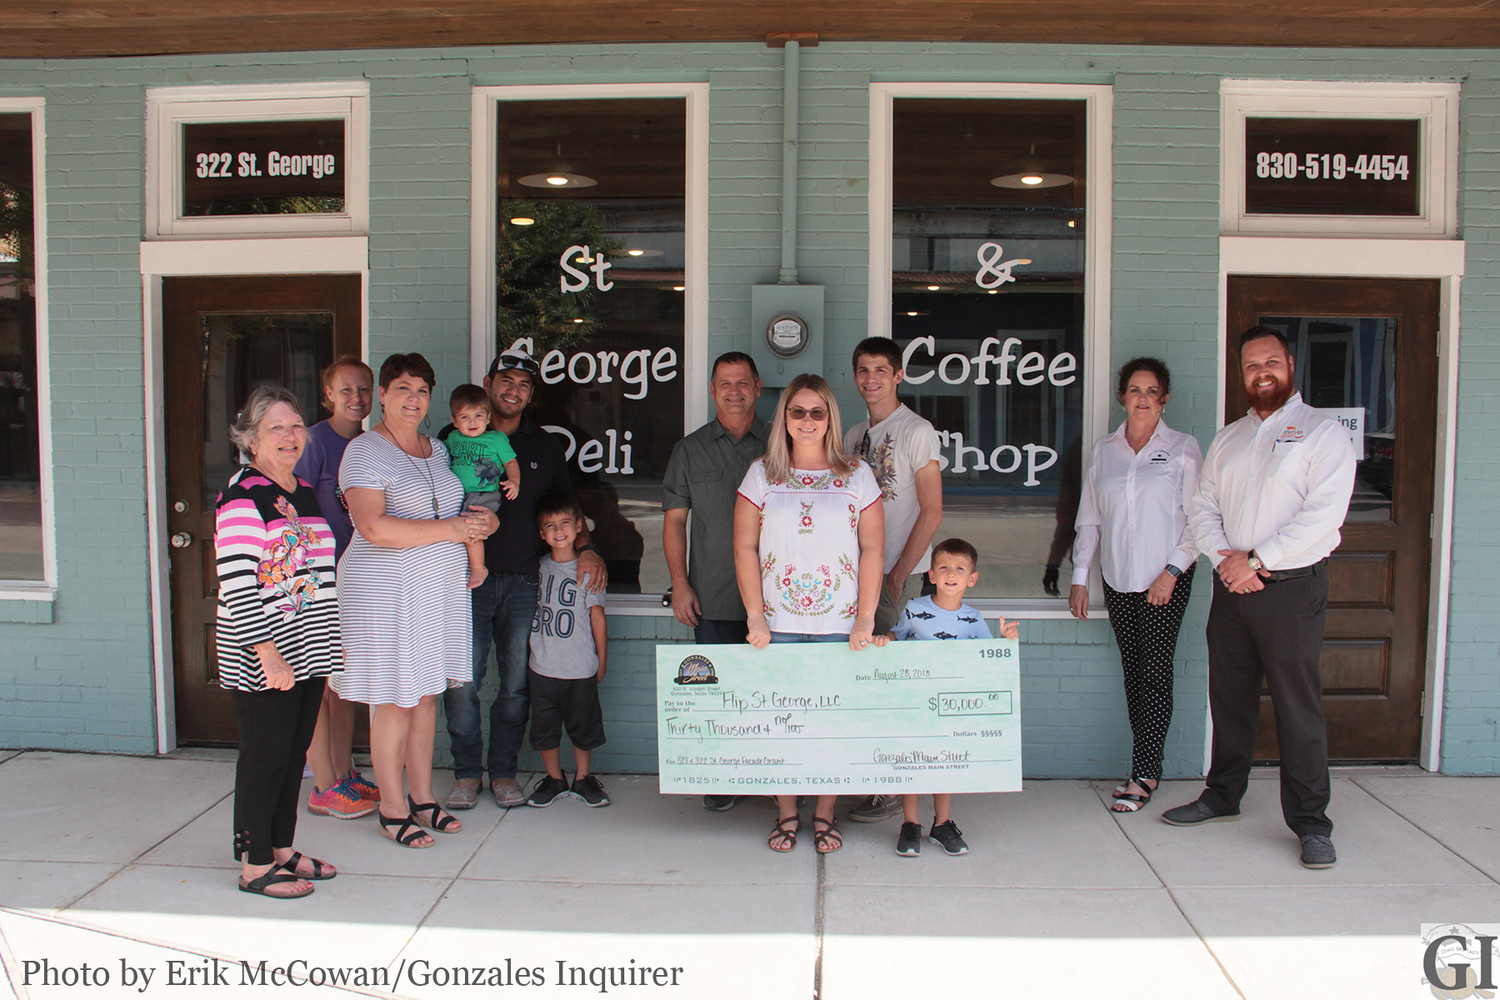 Members from Gonzales Main Street and the Gonzales Economic Development Corporation joined Jacob and Manda Leal and Linda and Stuart Frazier in front of their new storefront at 318 St. George Street, which is the latest recipient of a $30,000 small business grant to help revitalize the appearance of the building.